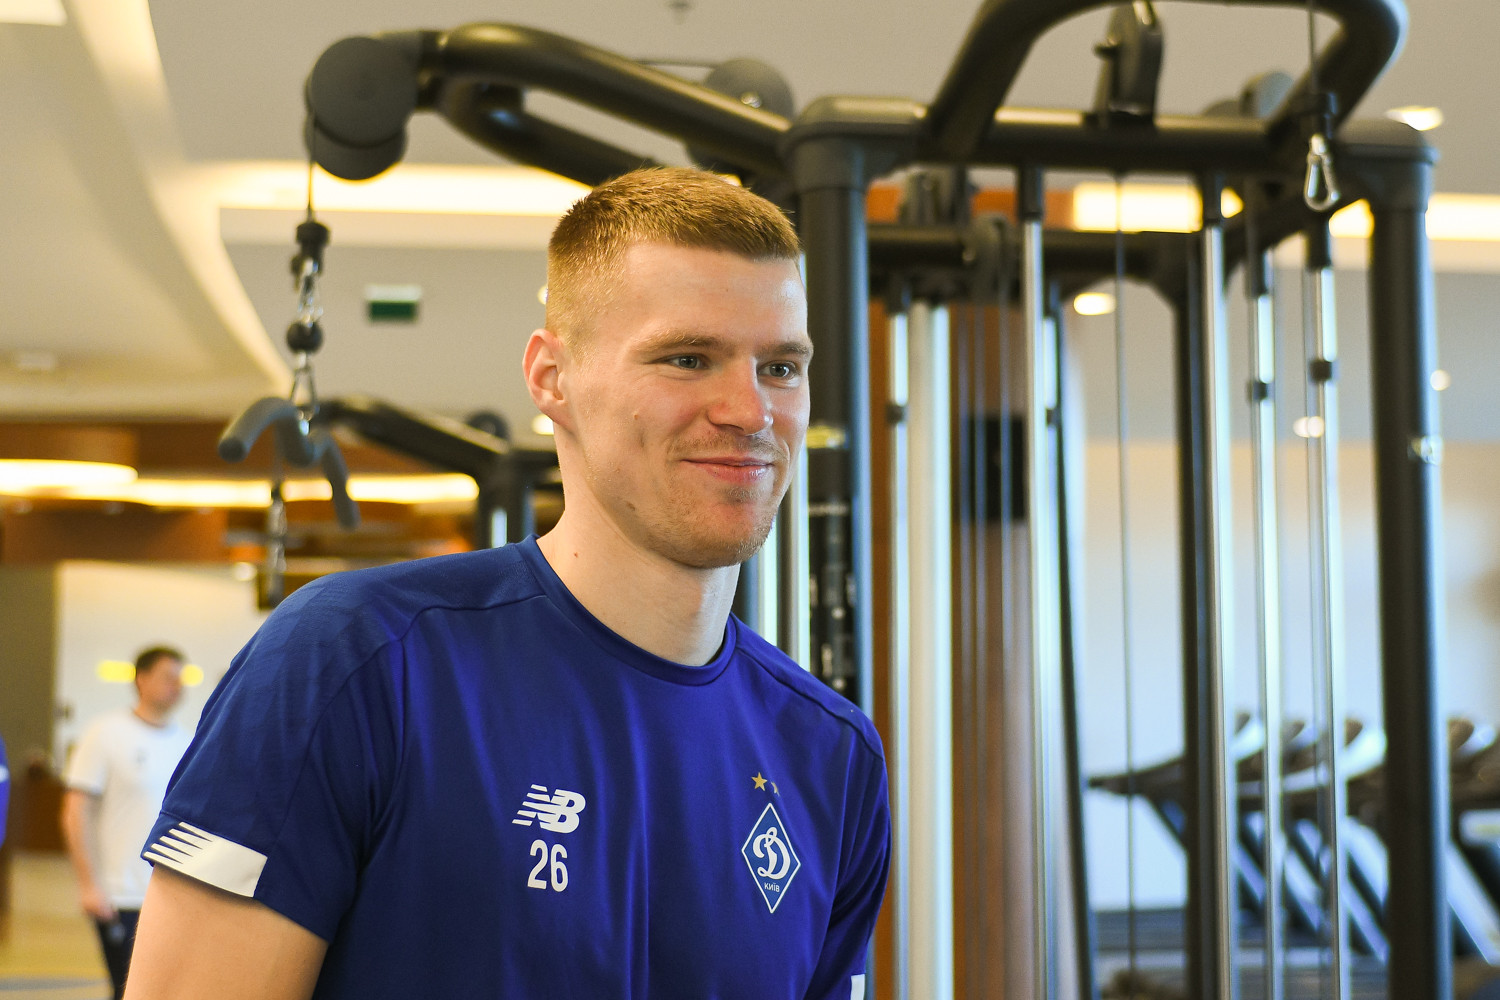 Mykyta Burda: “Every day I spend six-seven hours at the gym”